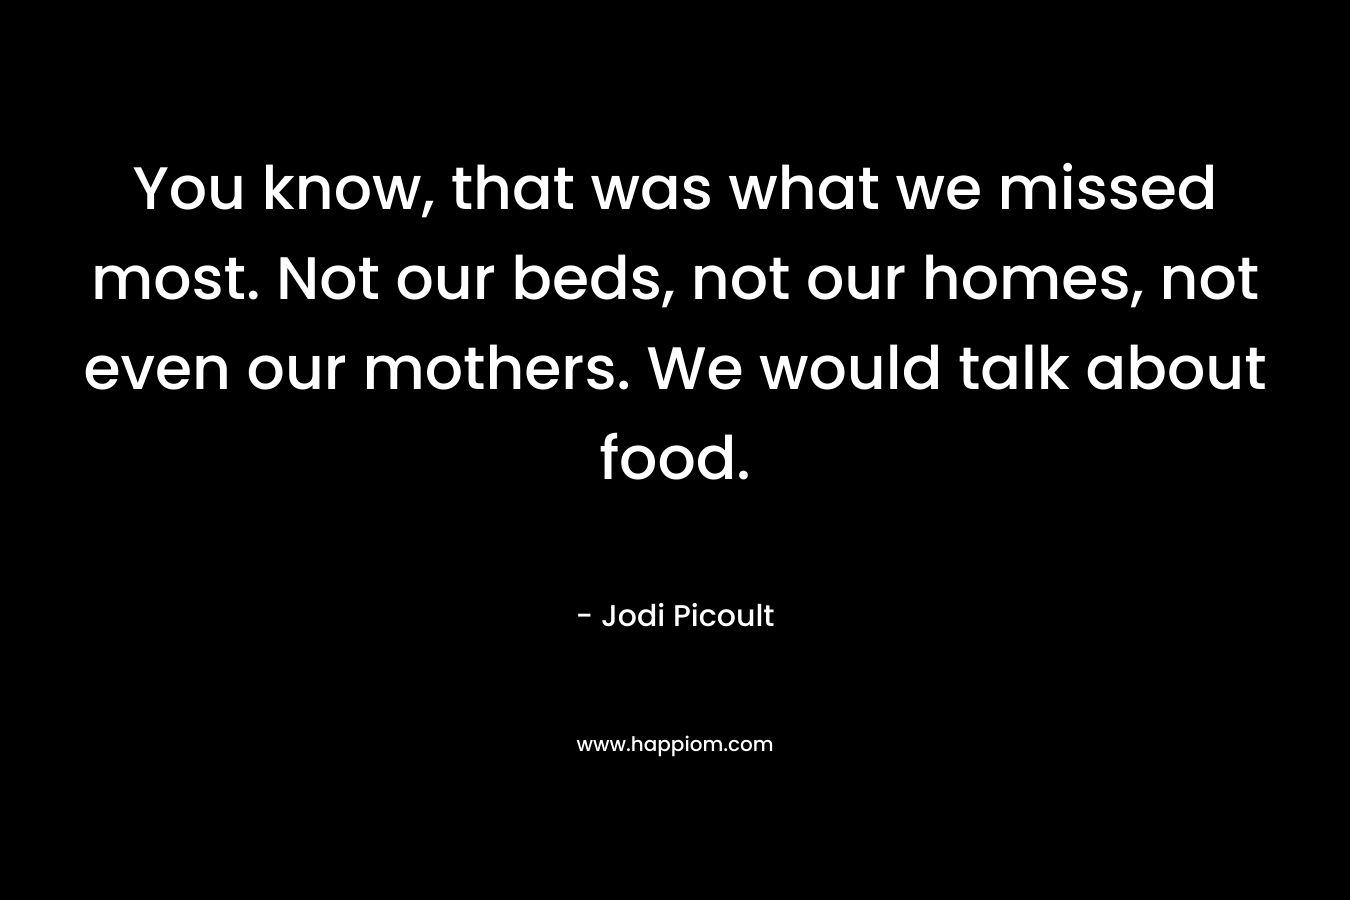 You know, that was what we missed most. Not our beds, not our homes, not even our mothers. We would talk about food.